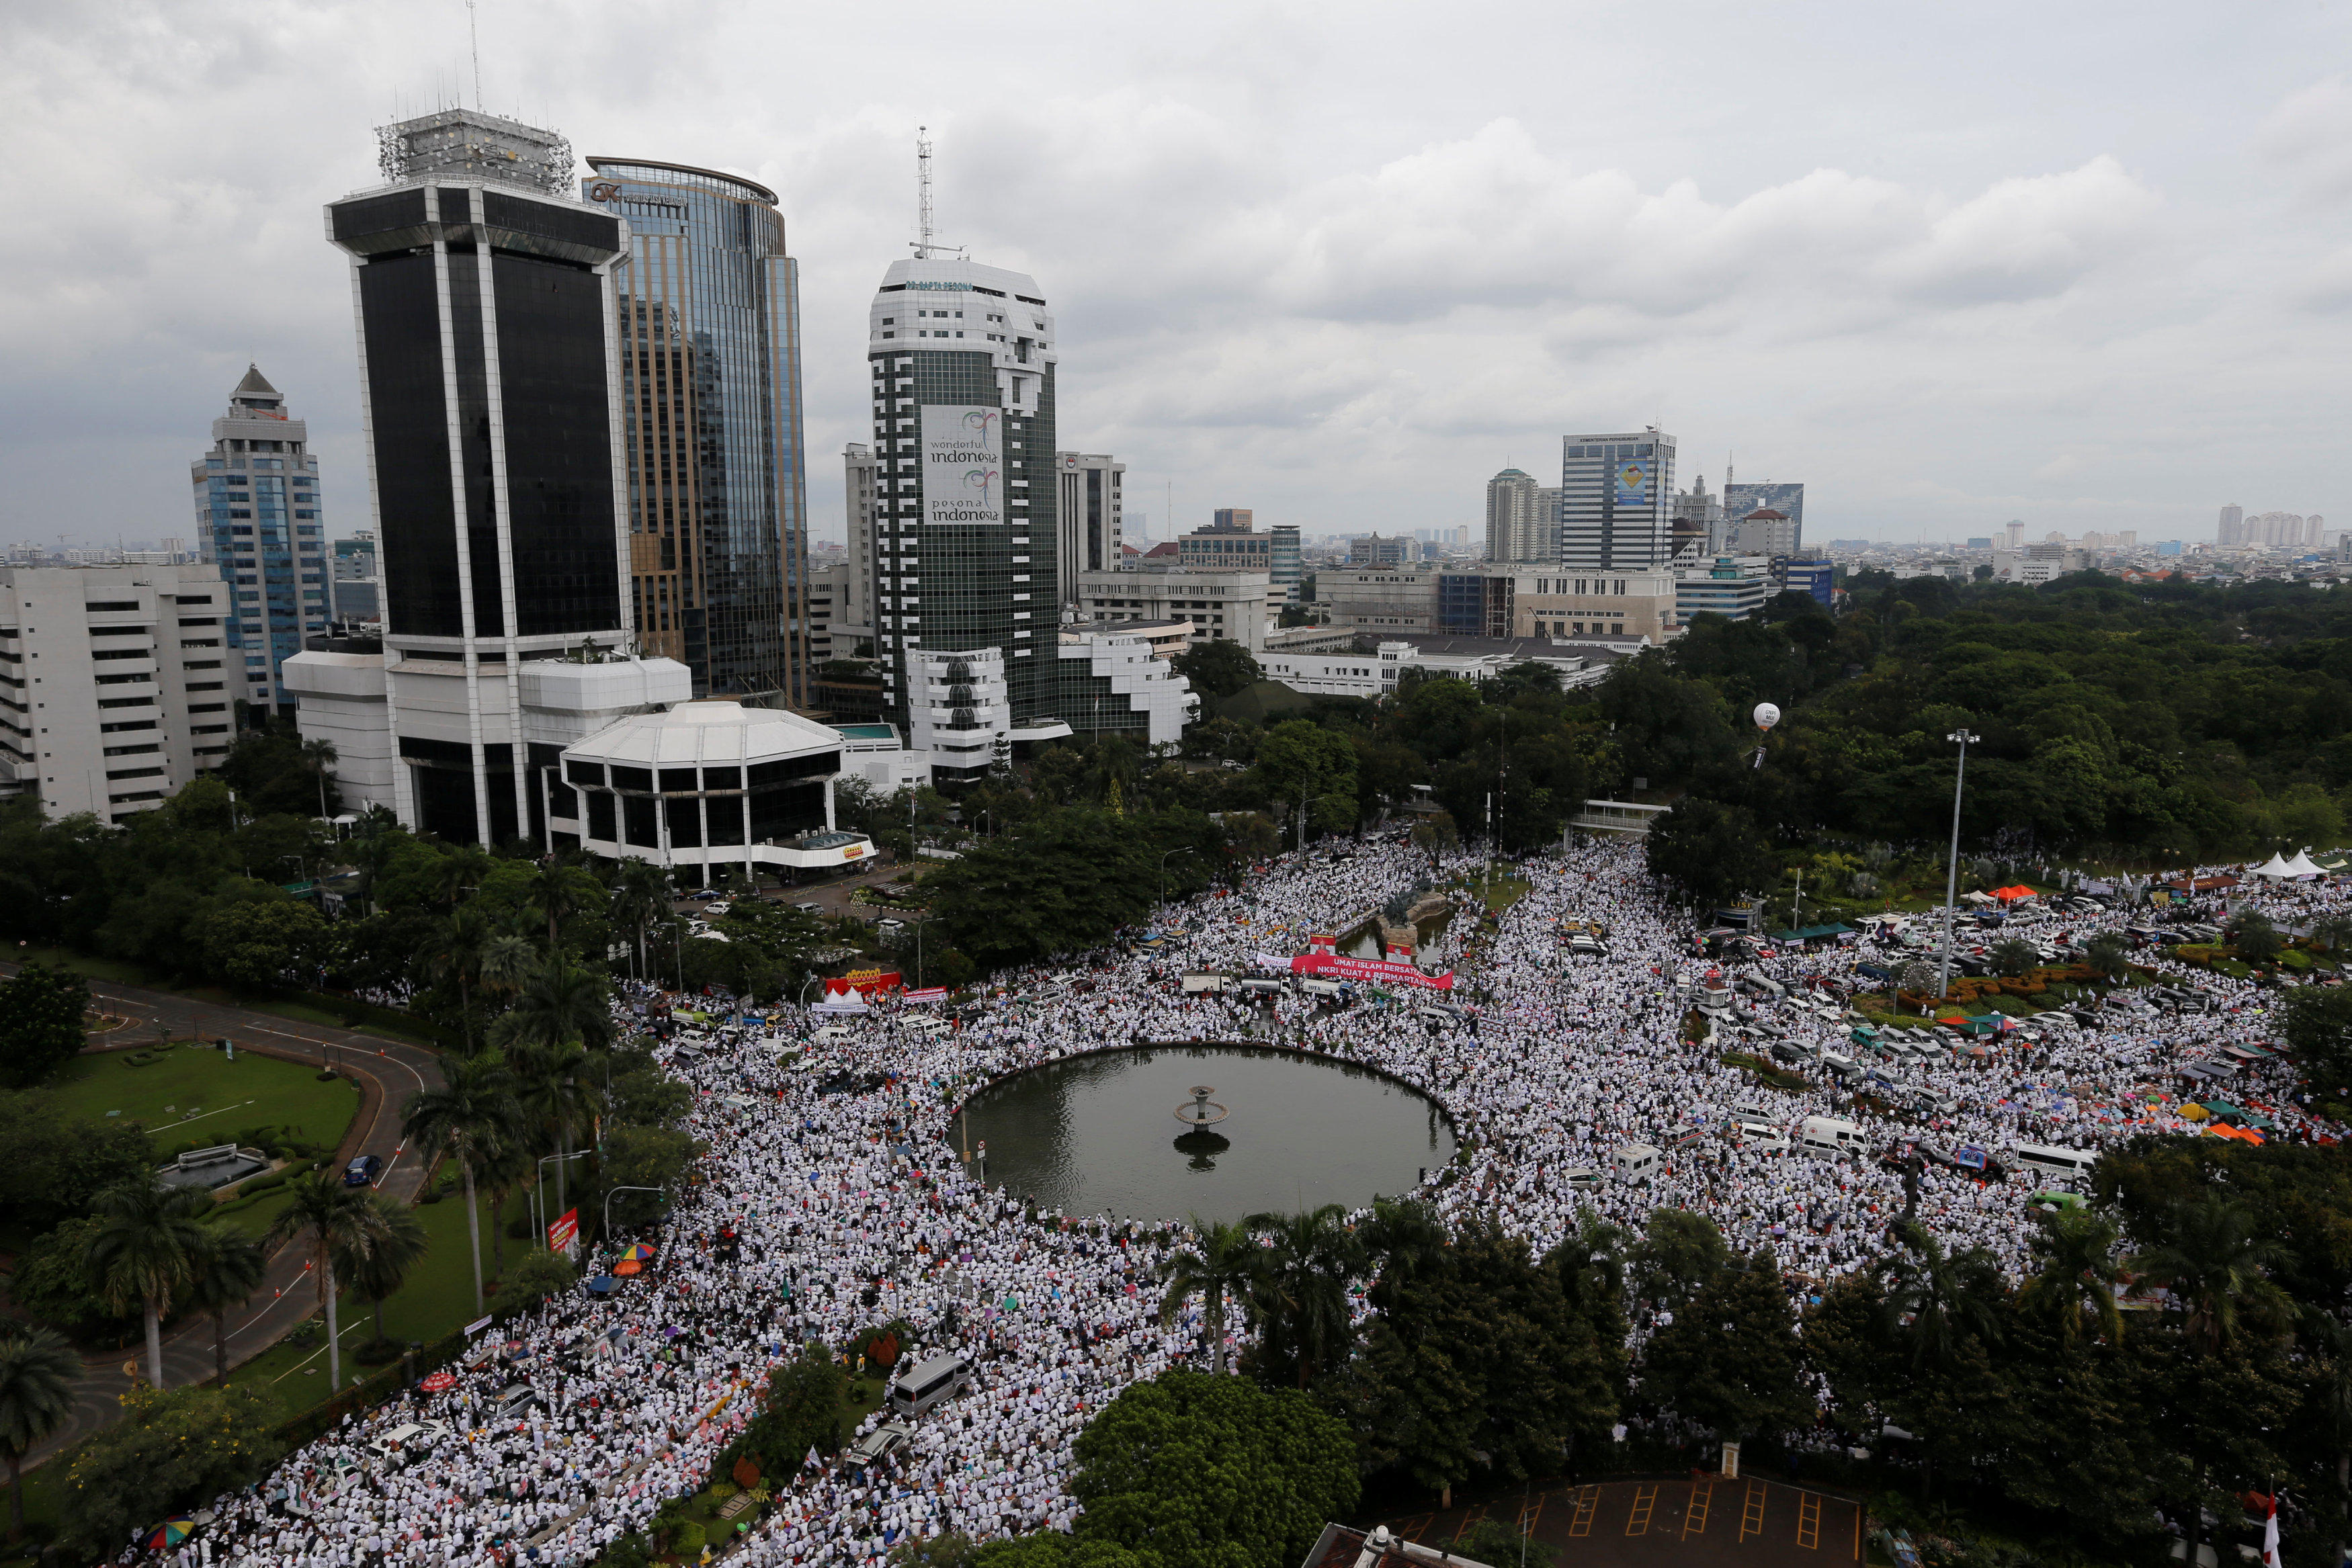  Indonesia  blasphemy protest swells to crowd of 200 000 